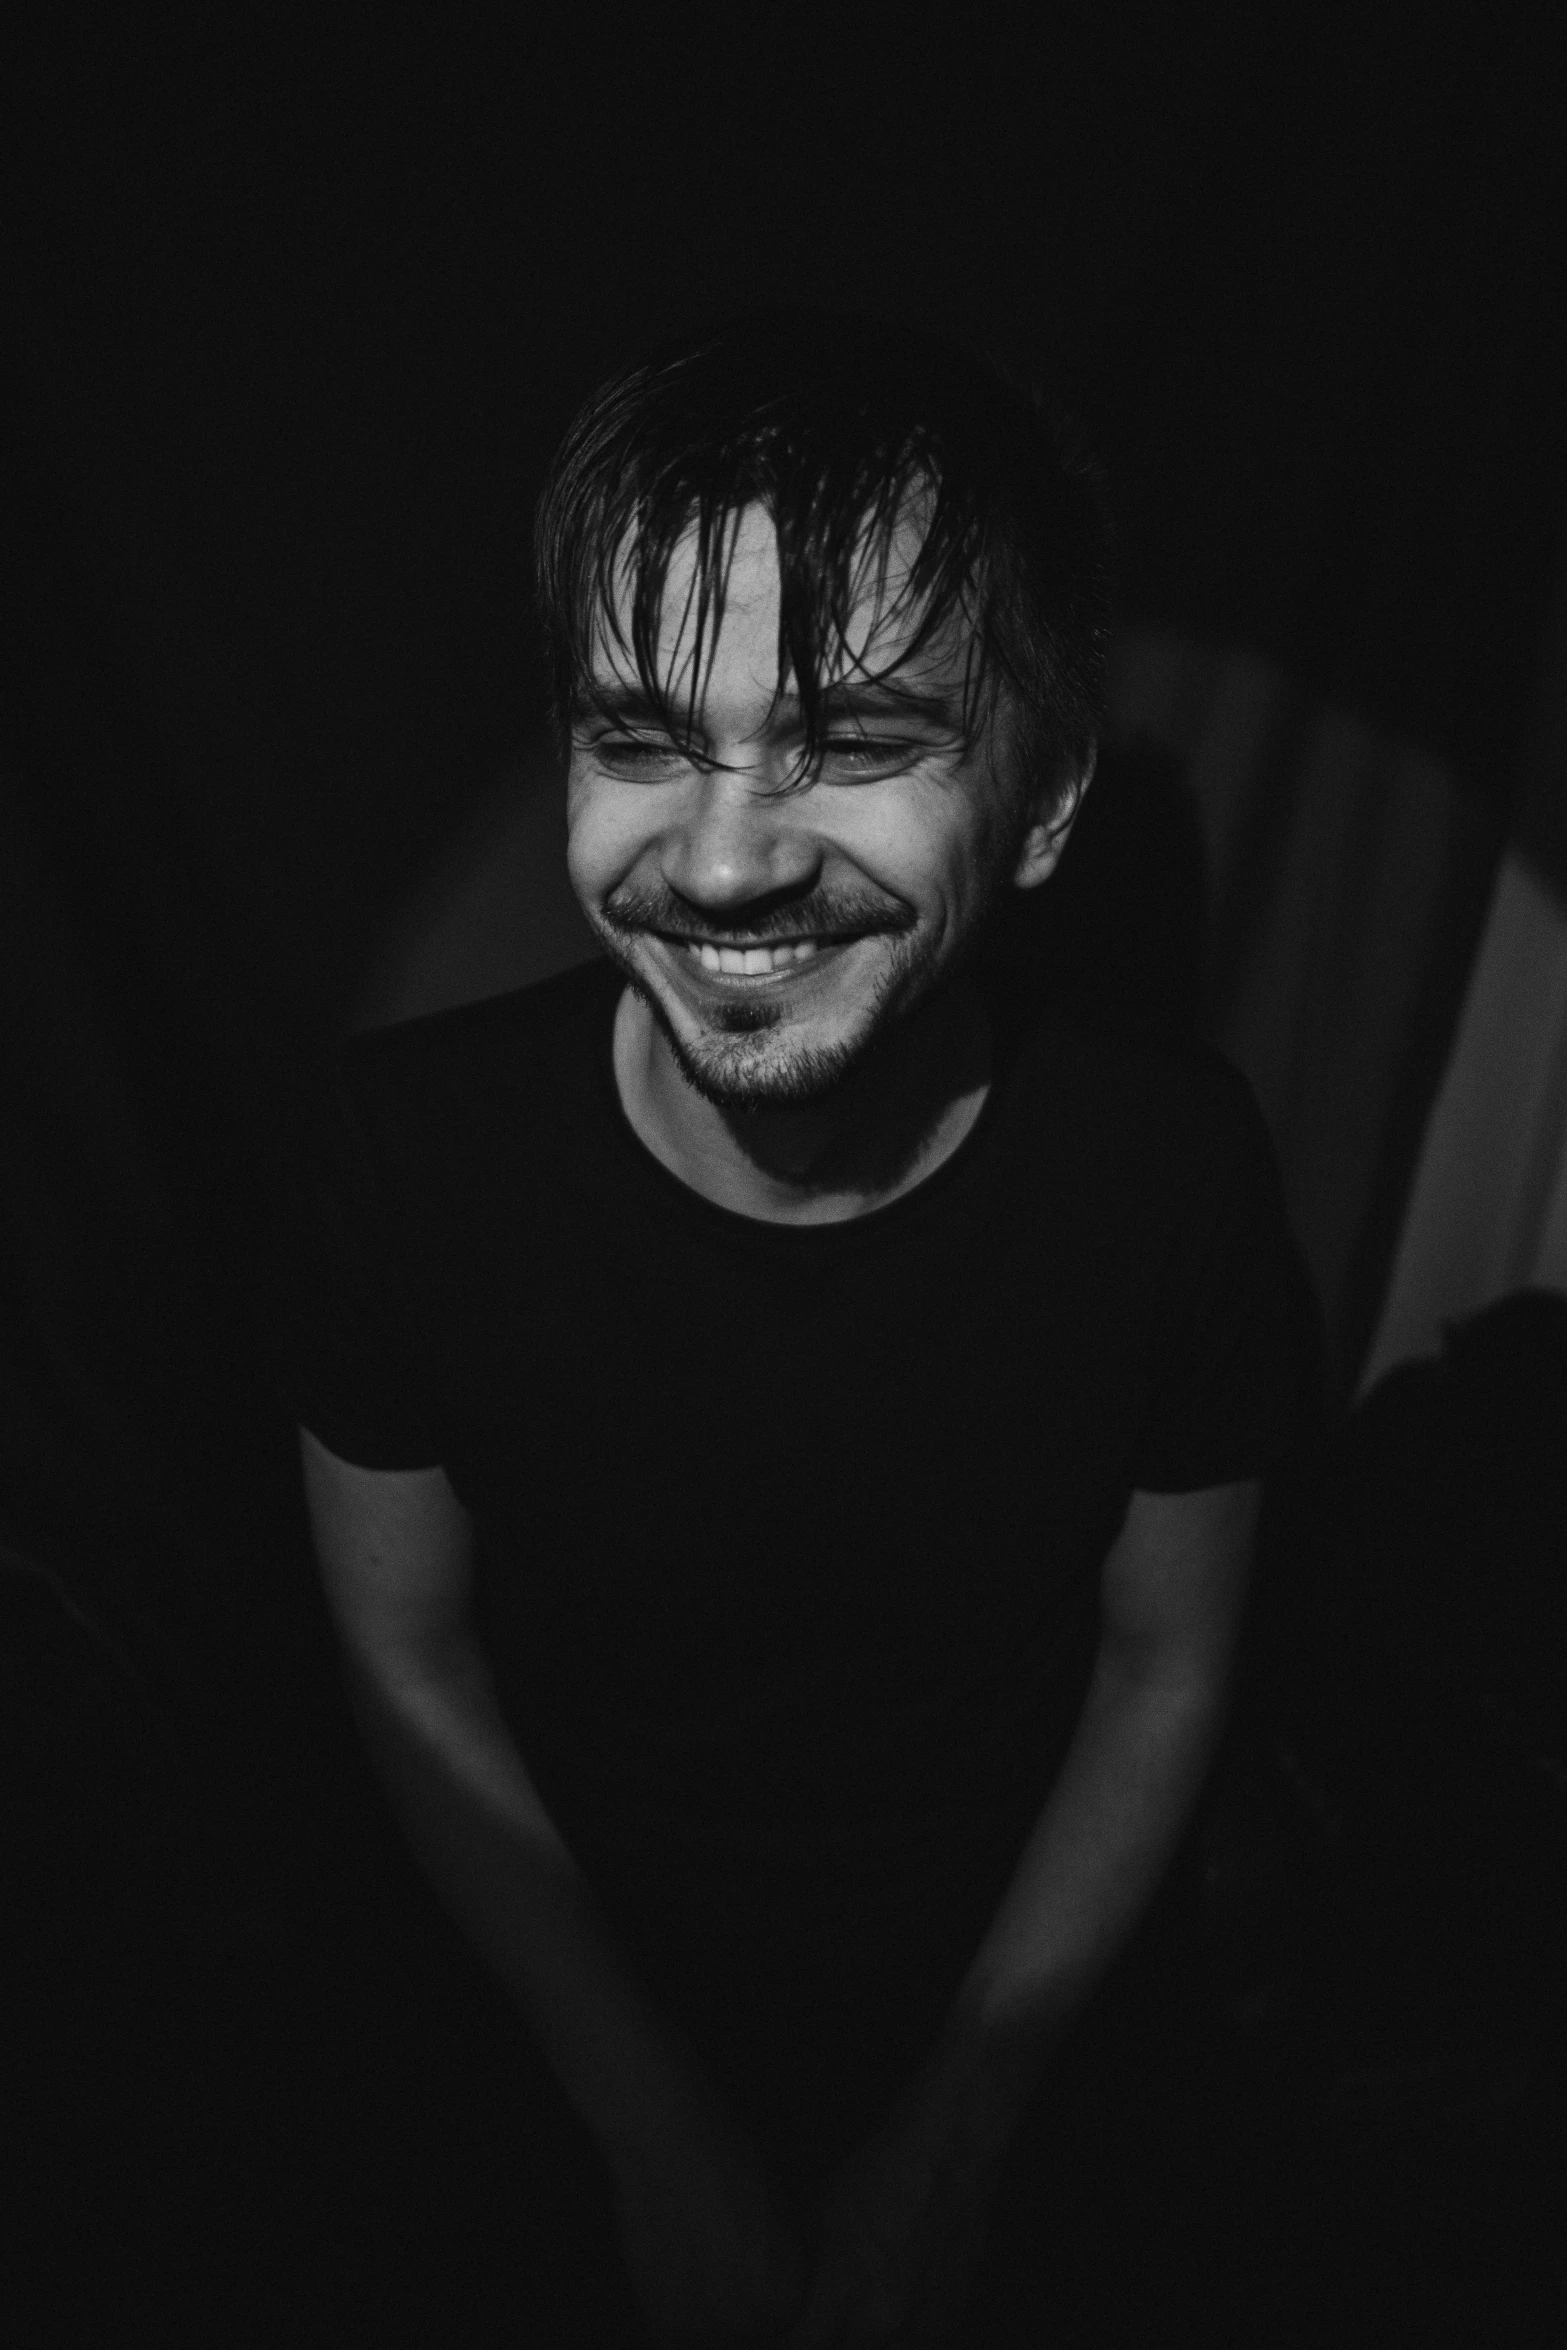 a man that is sitting down in the dark, a black and white photo, giddy smirk, symmetrical face orelsan, azamat khairov, smiling playfully